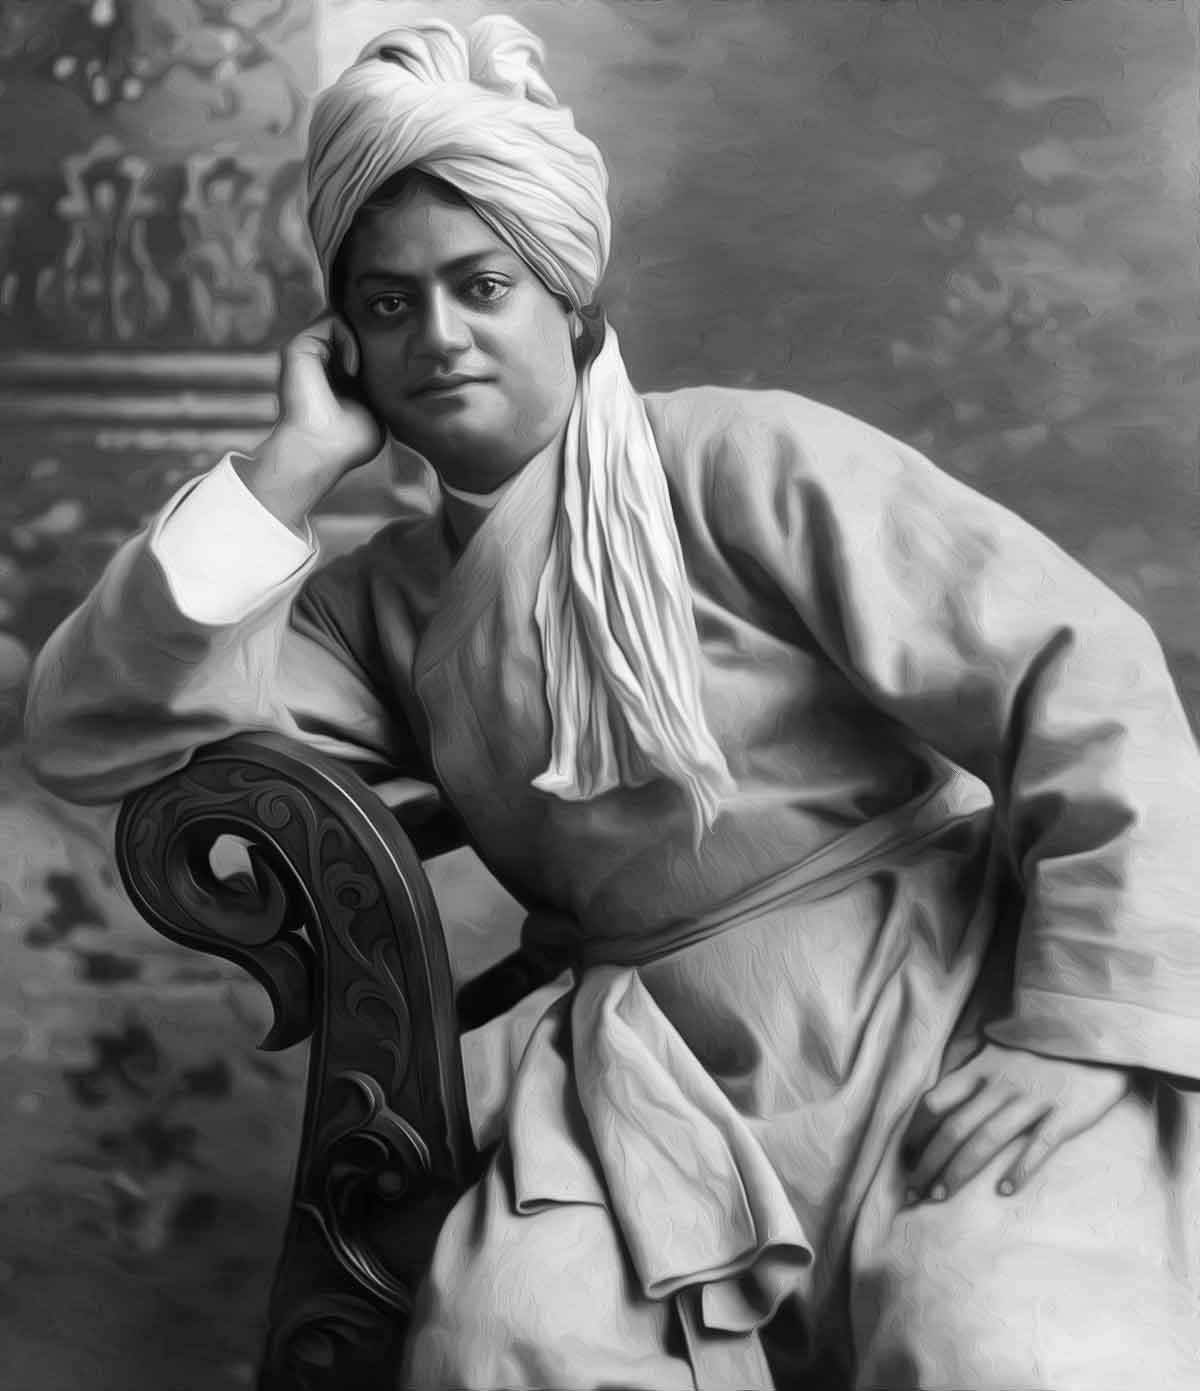 The surprising—and continuing—influence of Swami Vivekananda, the pied piper of the global yoga movement